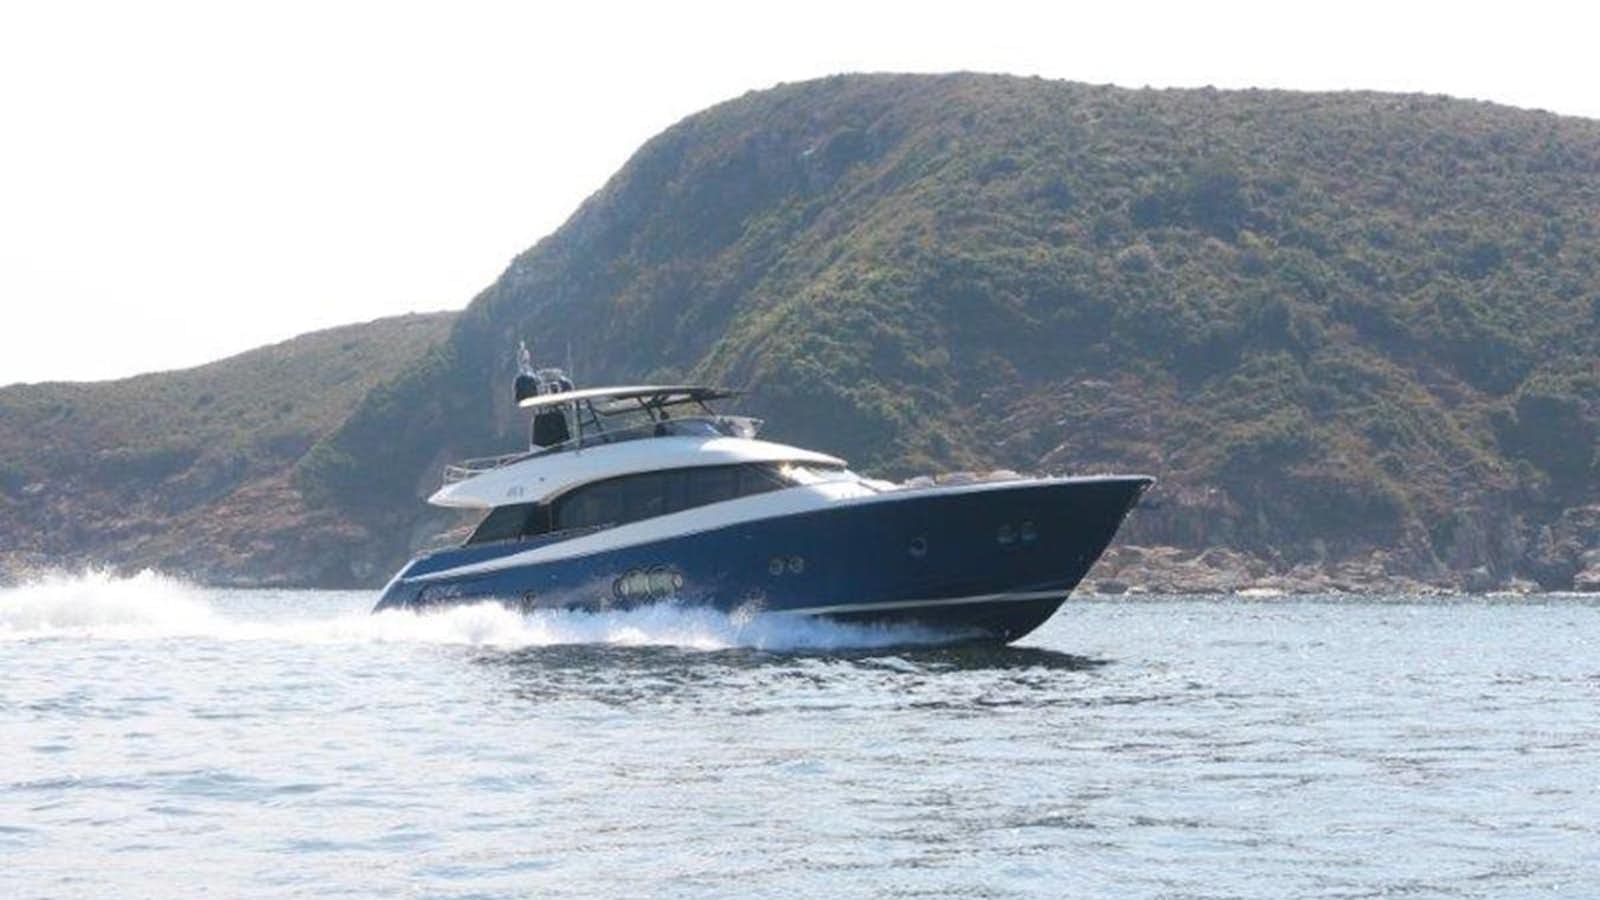 Aurore
Yacht for Sale